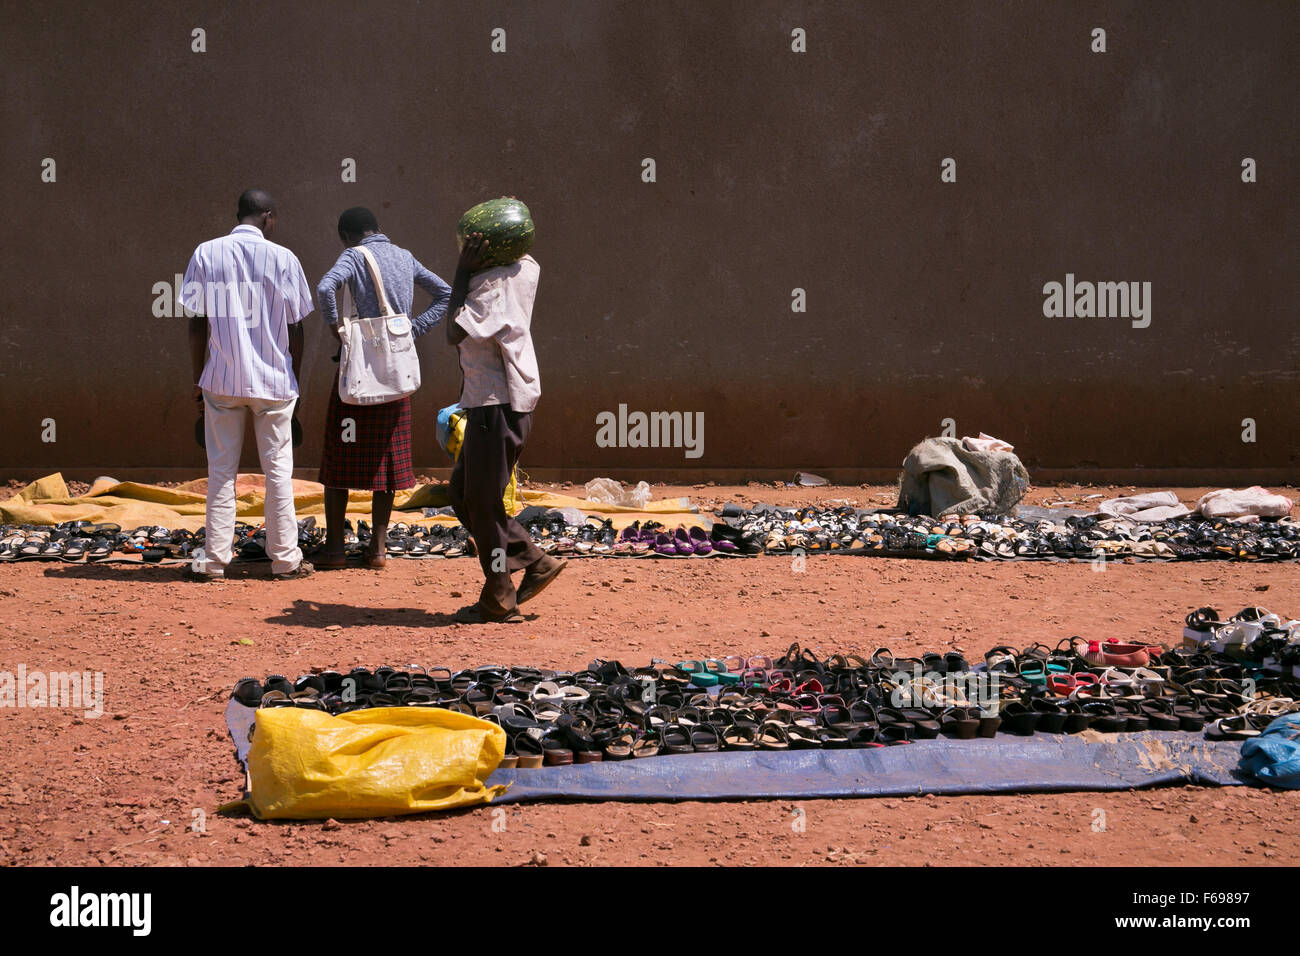 People look at shoes for sale in the outdoor market in Kayonza, Rwanda. Stock Photo